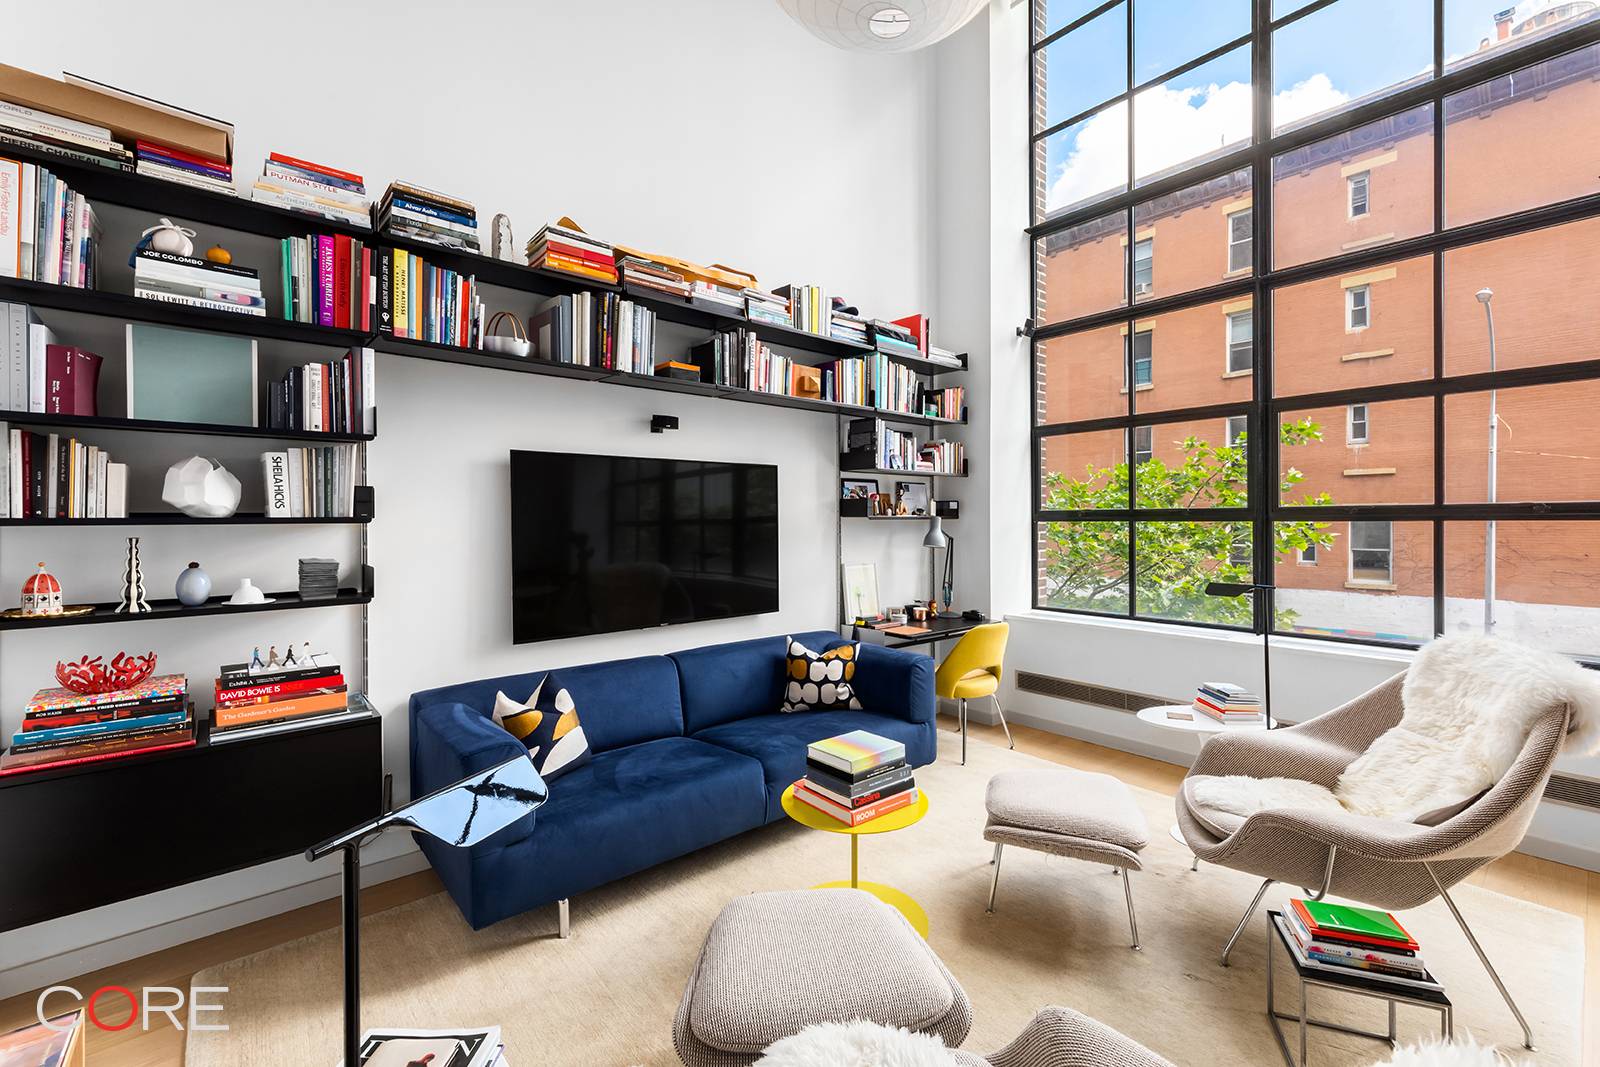 Carefully crafted, this beautiful home captures the artisan essence of West Chelsea with soaring 18 foot ceilings, open space and views of the High Line.